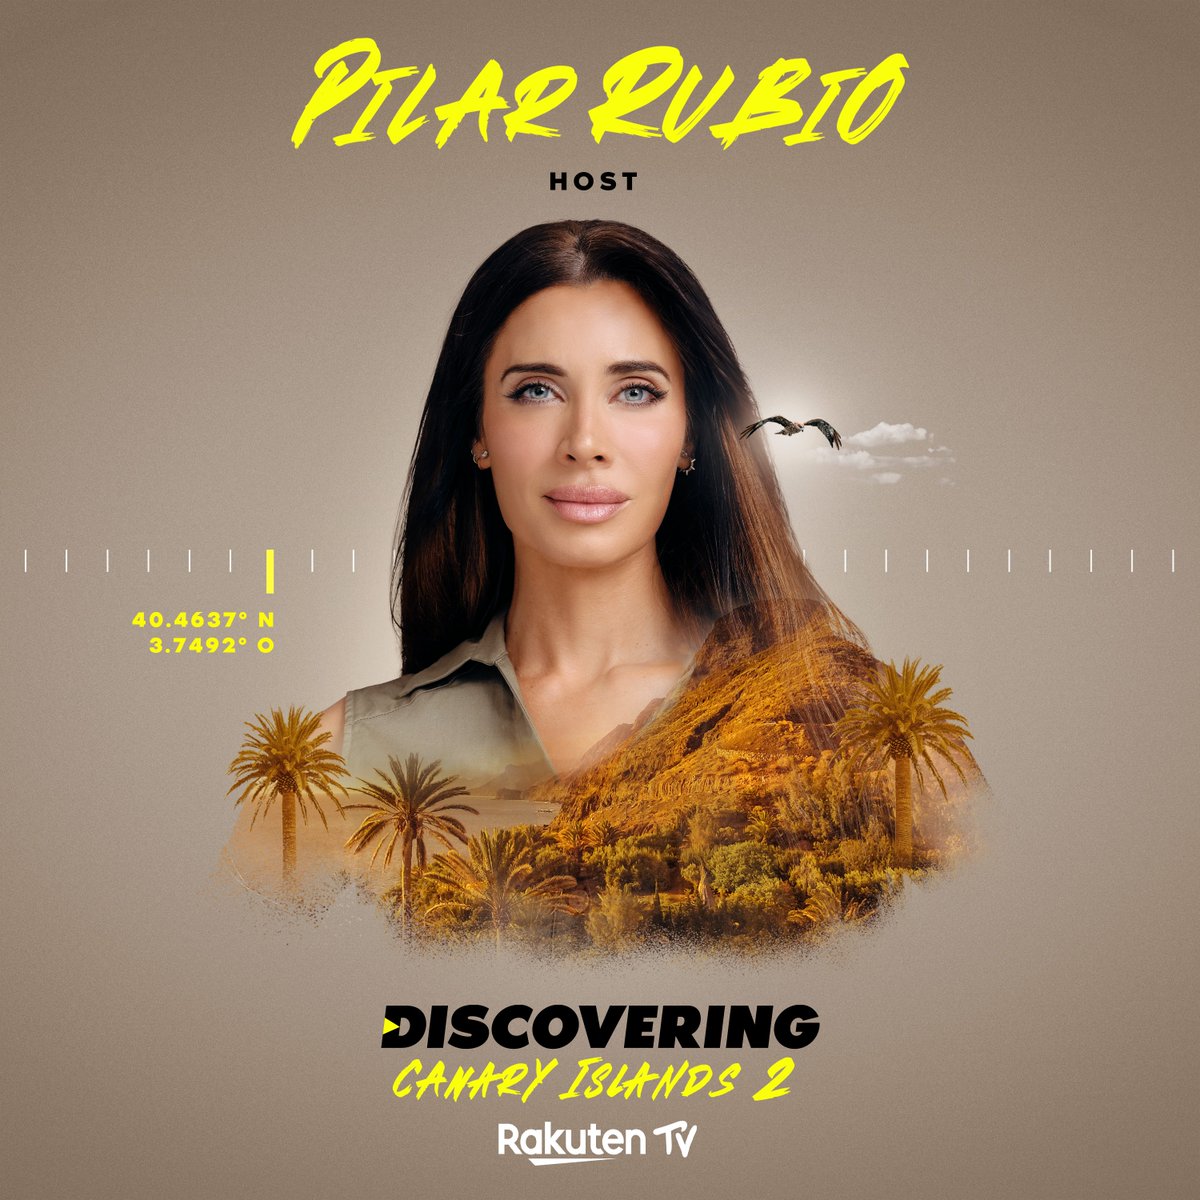 🏝️ Meet our host! 🏝️ Pilar Rubio  ❤️💛❤️ returns as the MC of #DiscoveringCanaryIslands to razzle and dazzle us into this Season Two adventure: the unstoppable 💥 Spanish television presente will lead our 8 explorers 🗺️ #DiscoveringCanaryIslands, 26/01 on #RakutenTV 📺